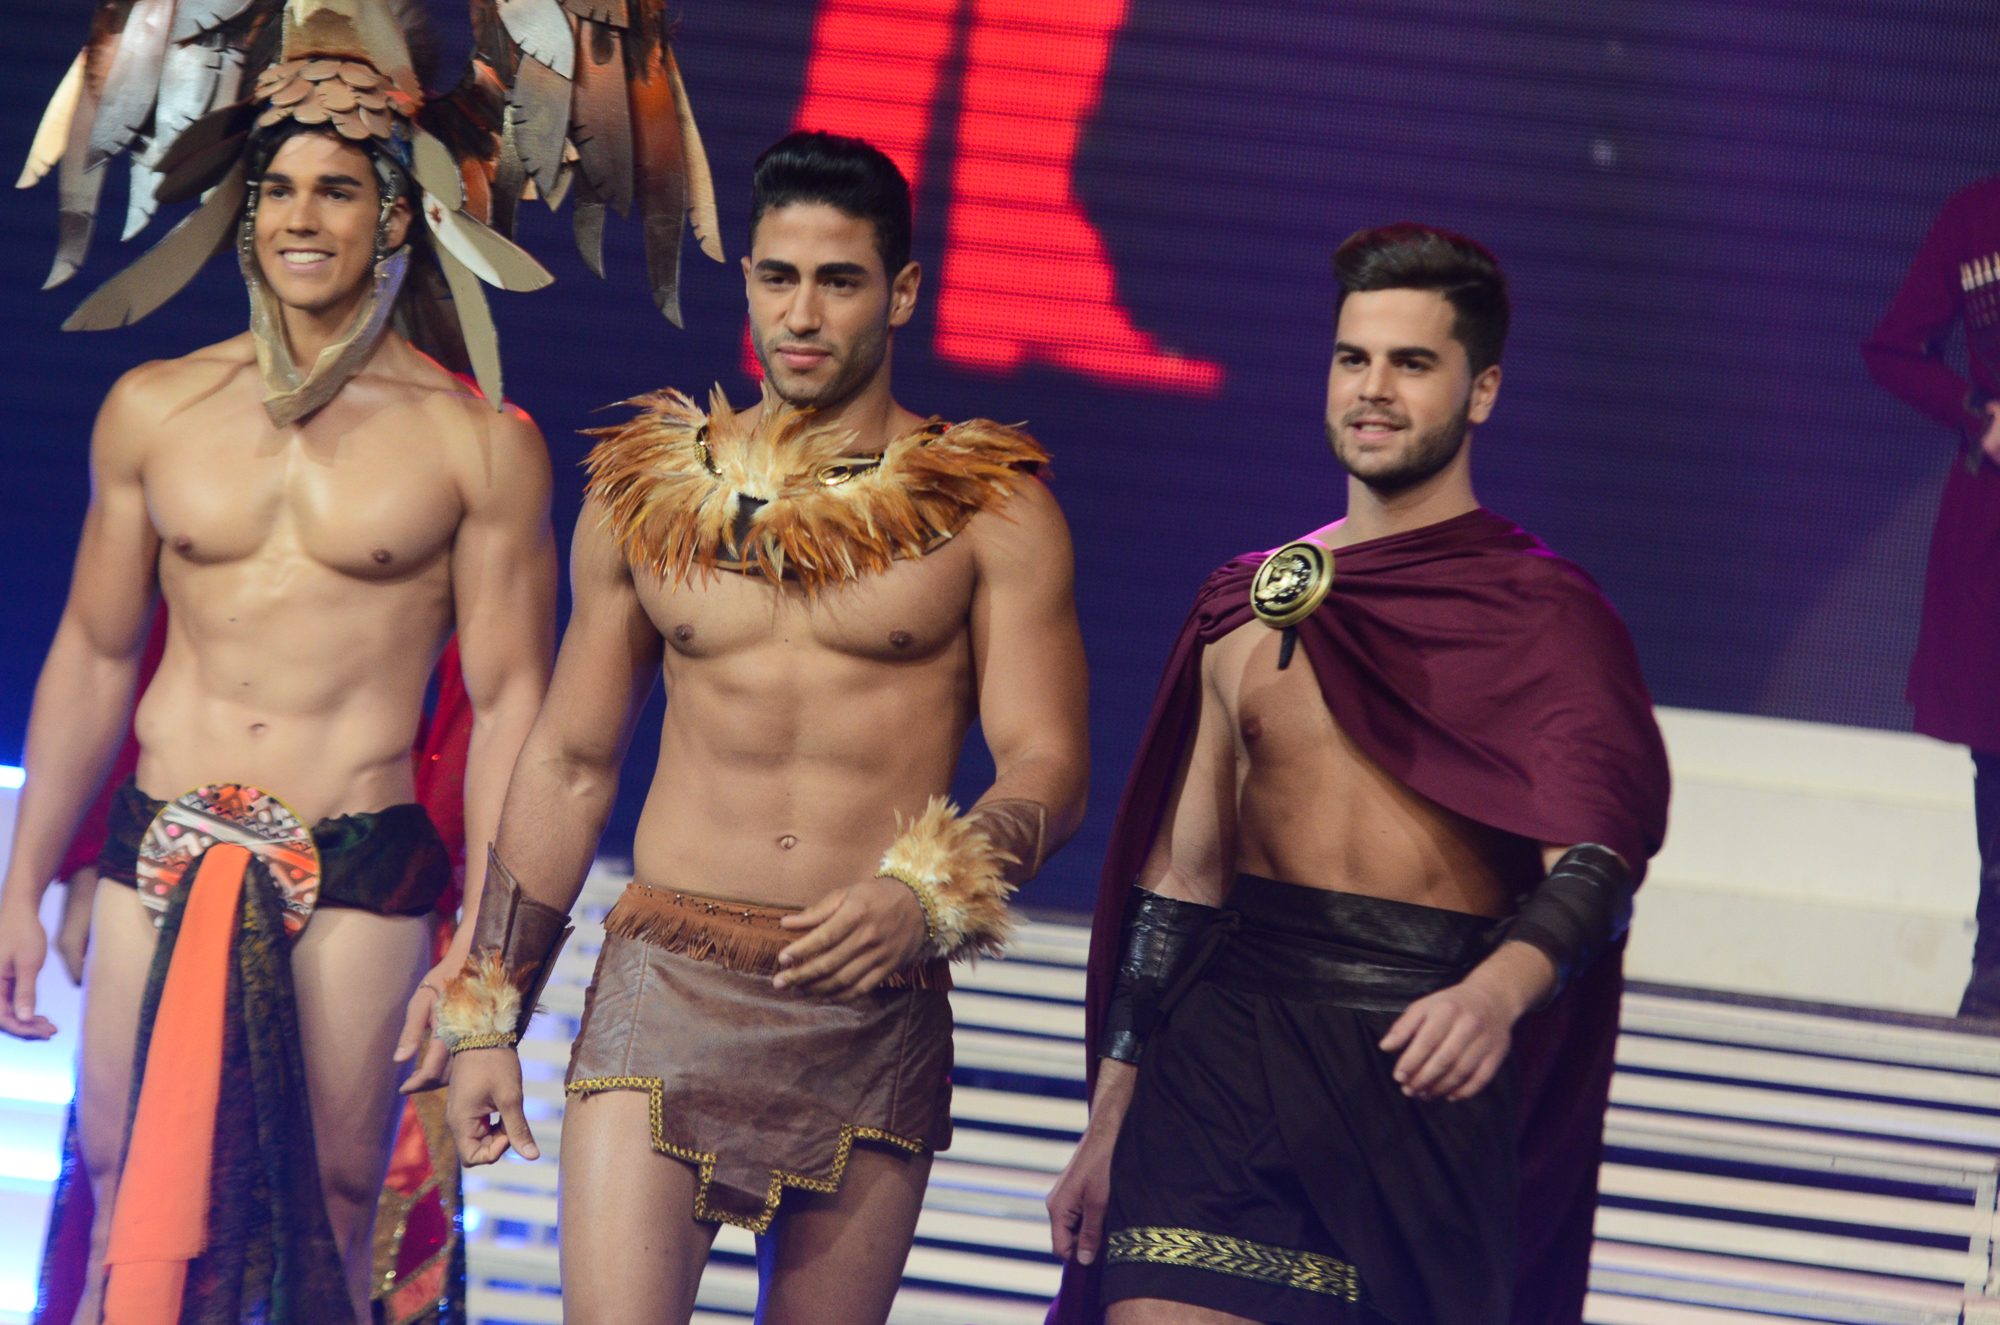 IN PHOTOS: Mister International 2015 candidates in national costumes